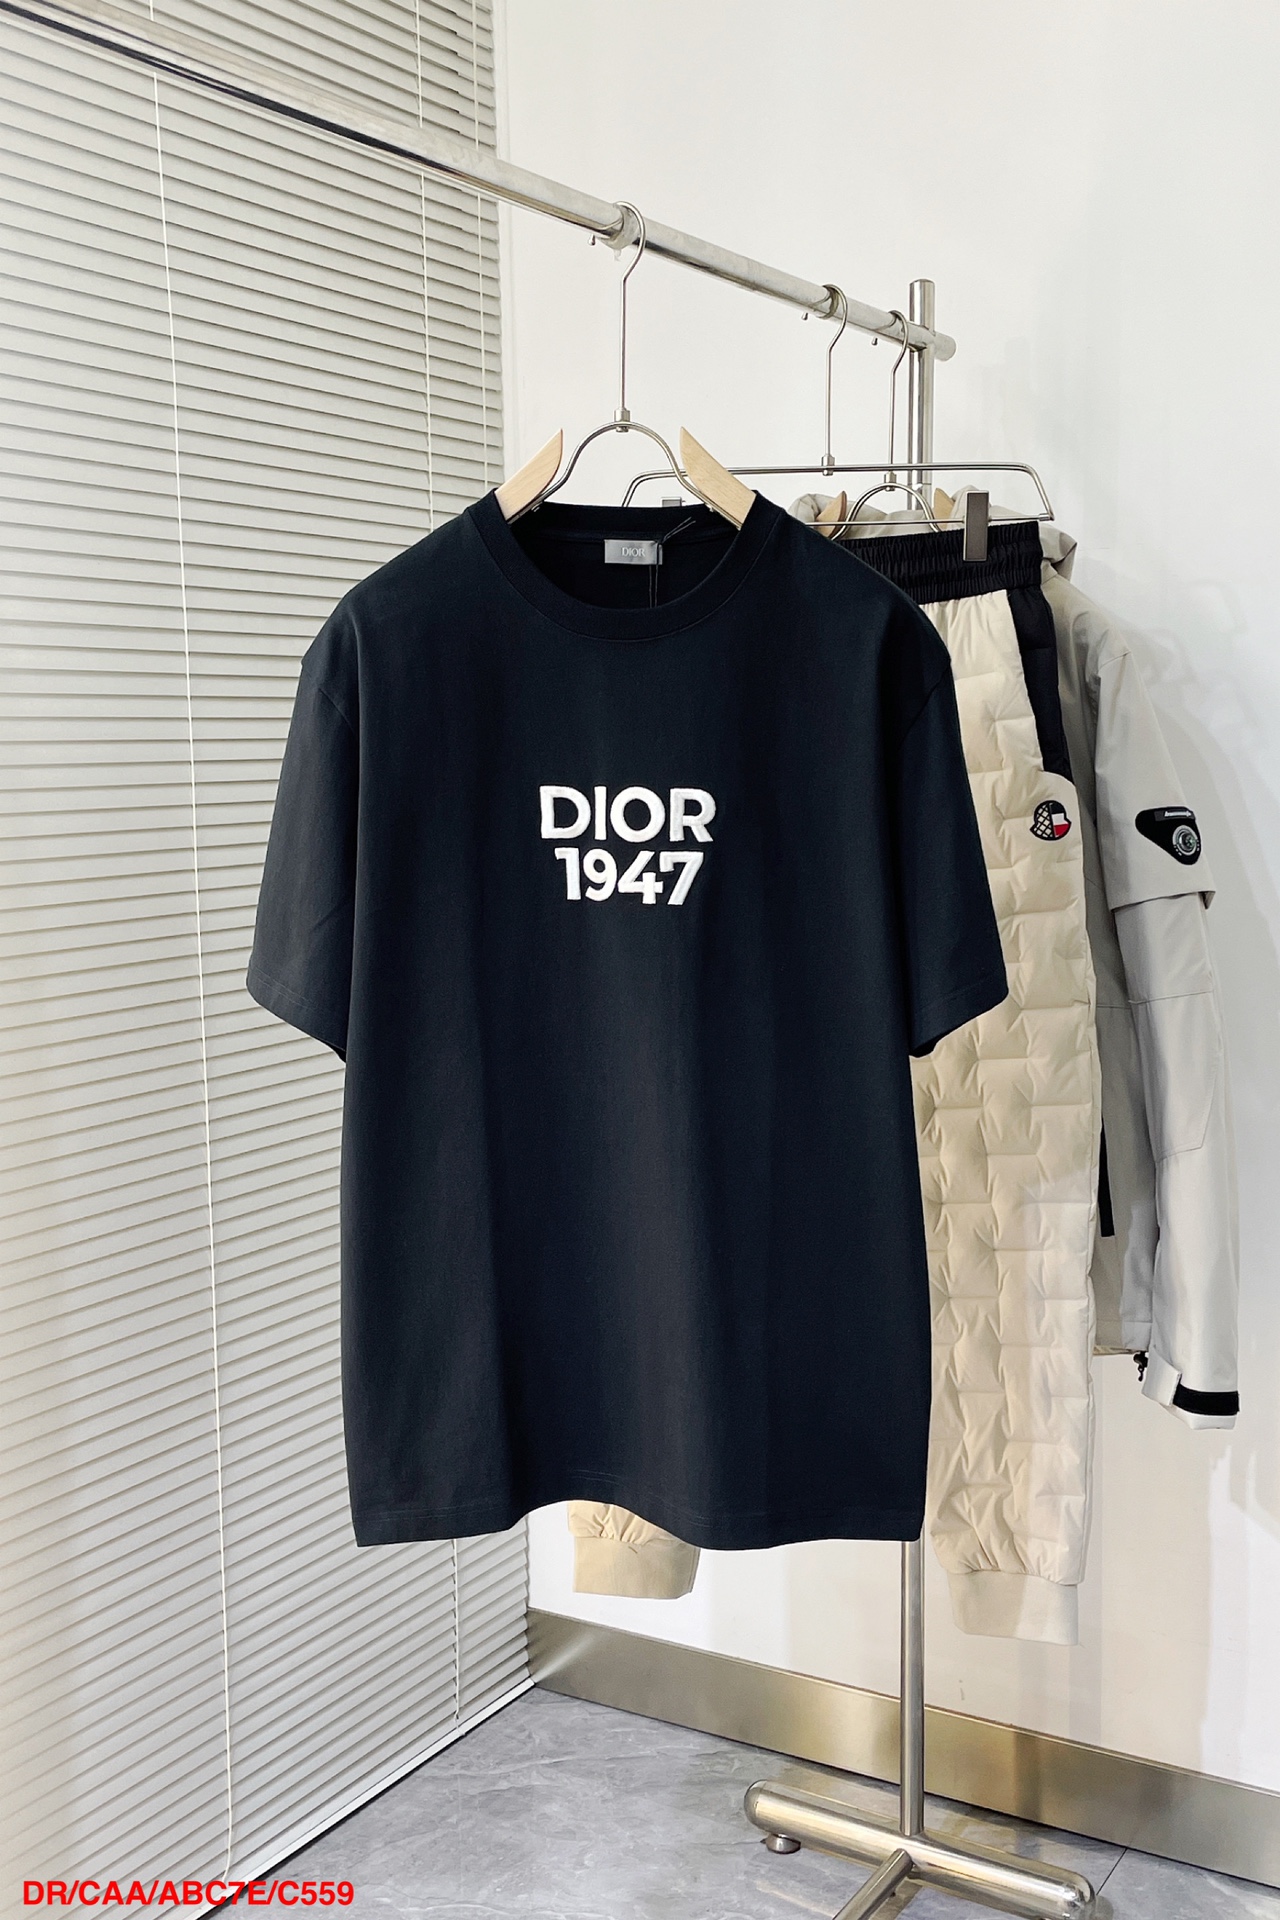 Dior Clothing T-Shirt Replica Every Designer
 Blue Navy White Embroidery Combed Cotton Fabric Knitting 1947 Short Sleeve